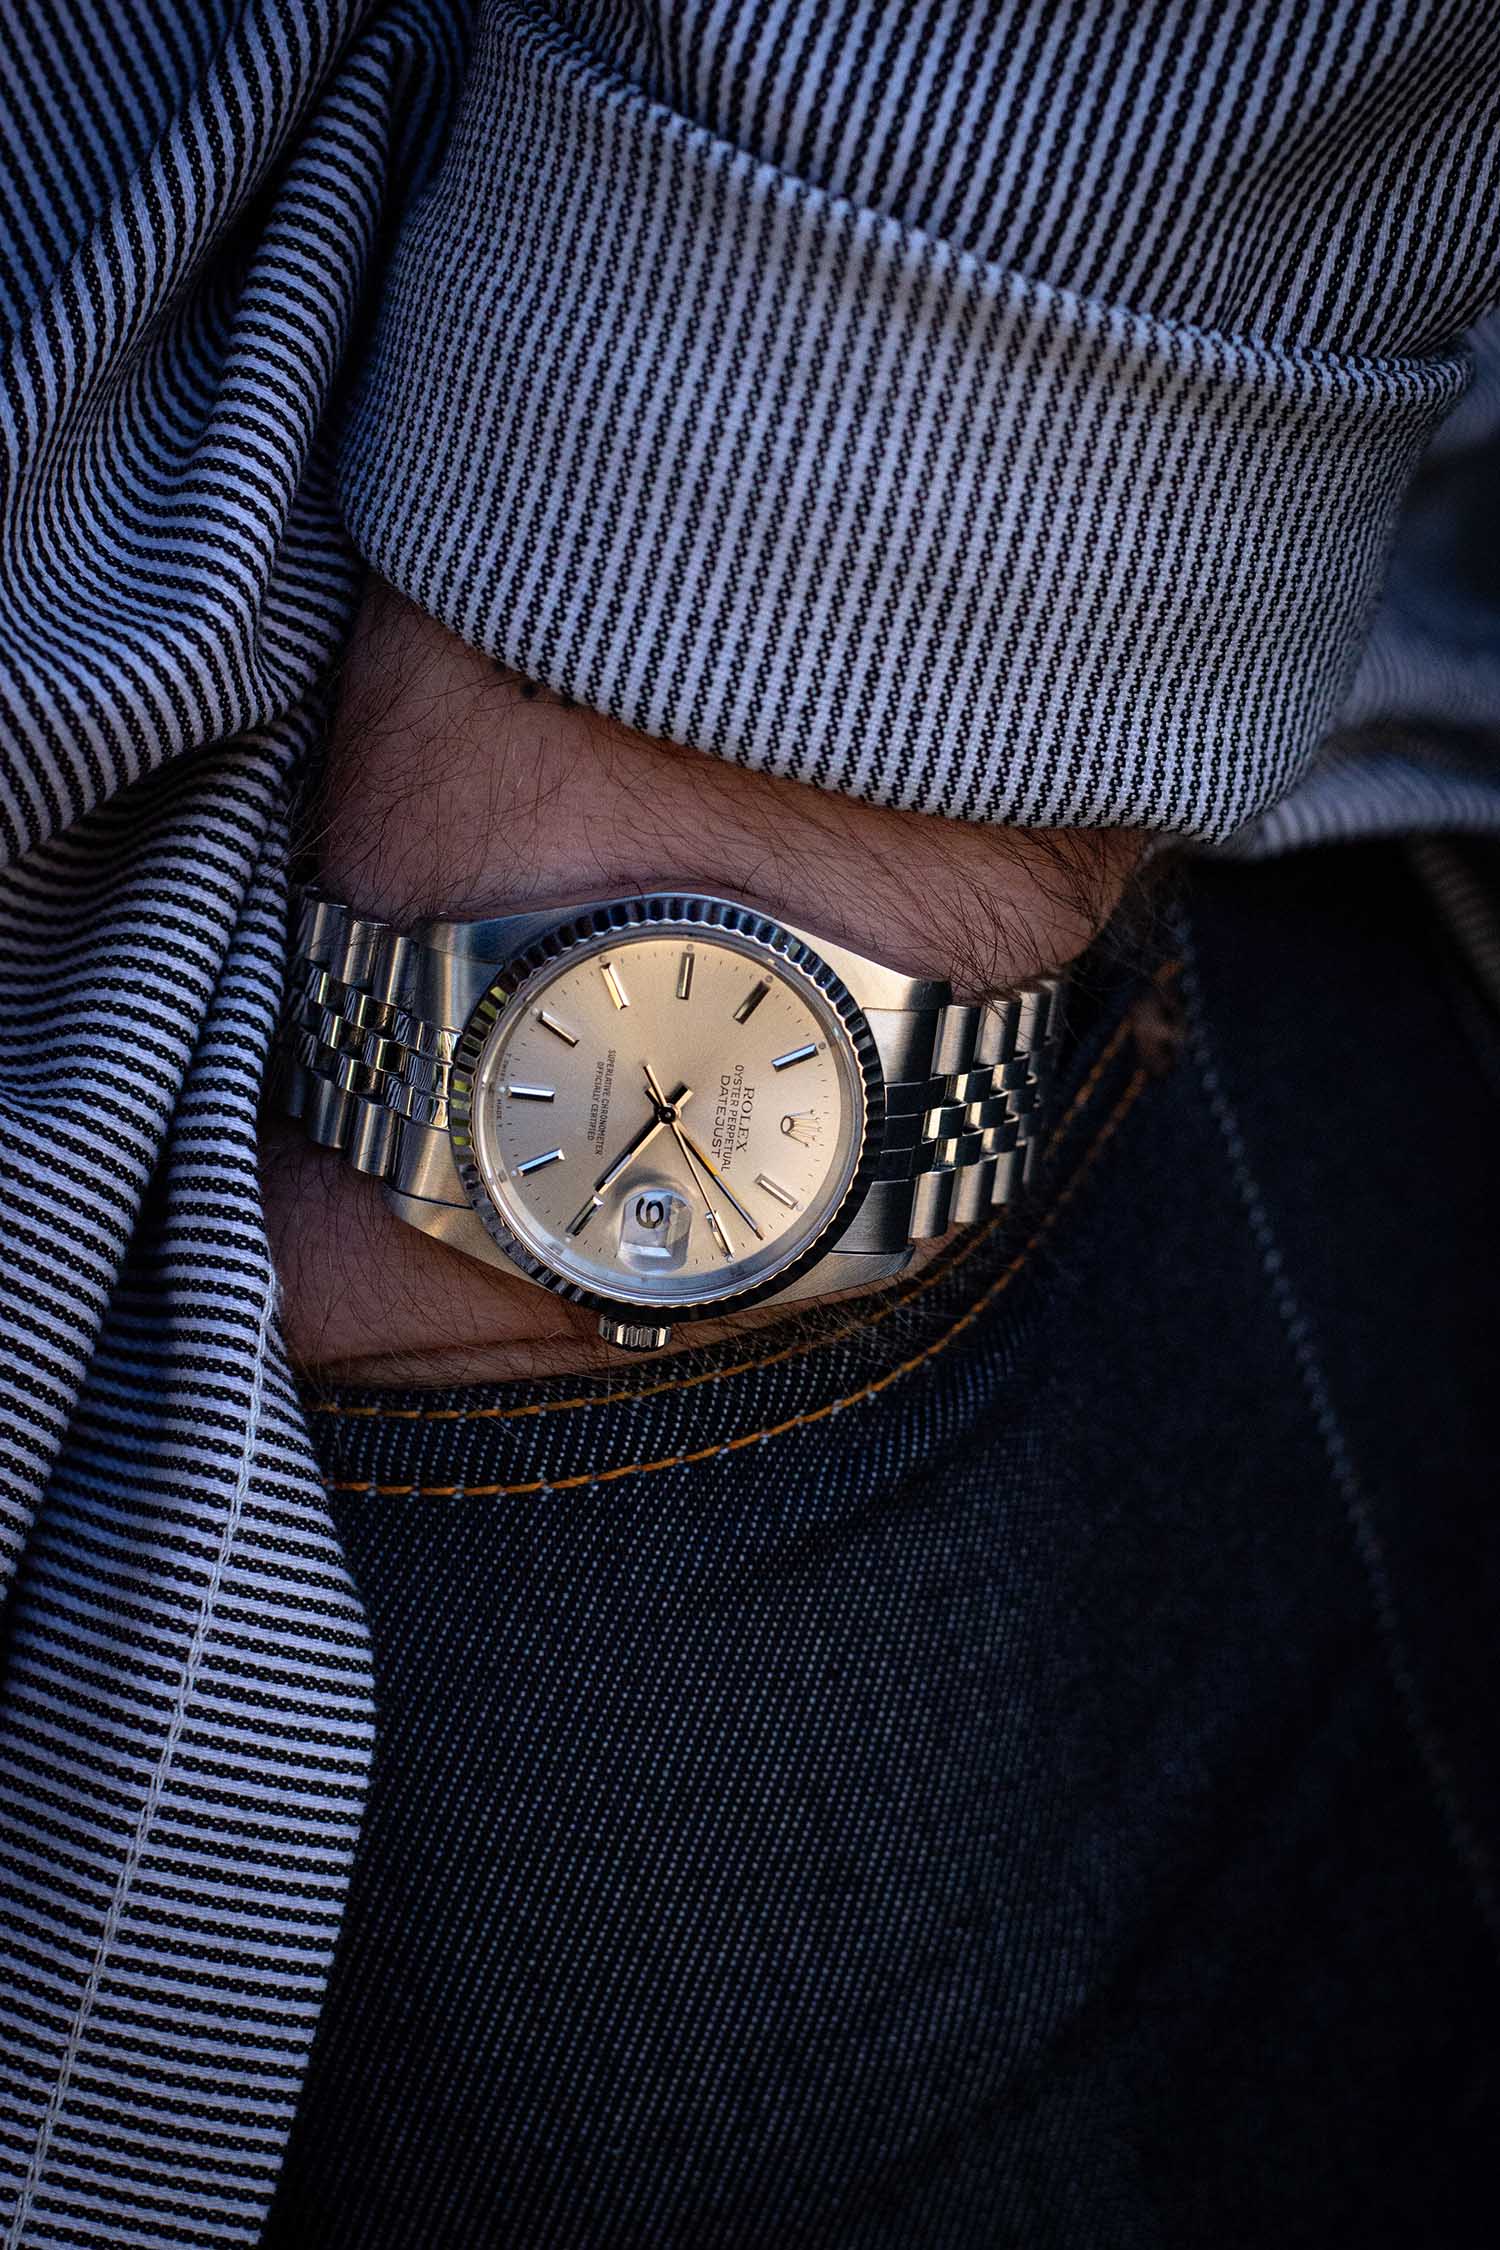 Charlie Paris Watch Review: Uncovering the Timeless Elegance and Quality